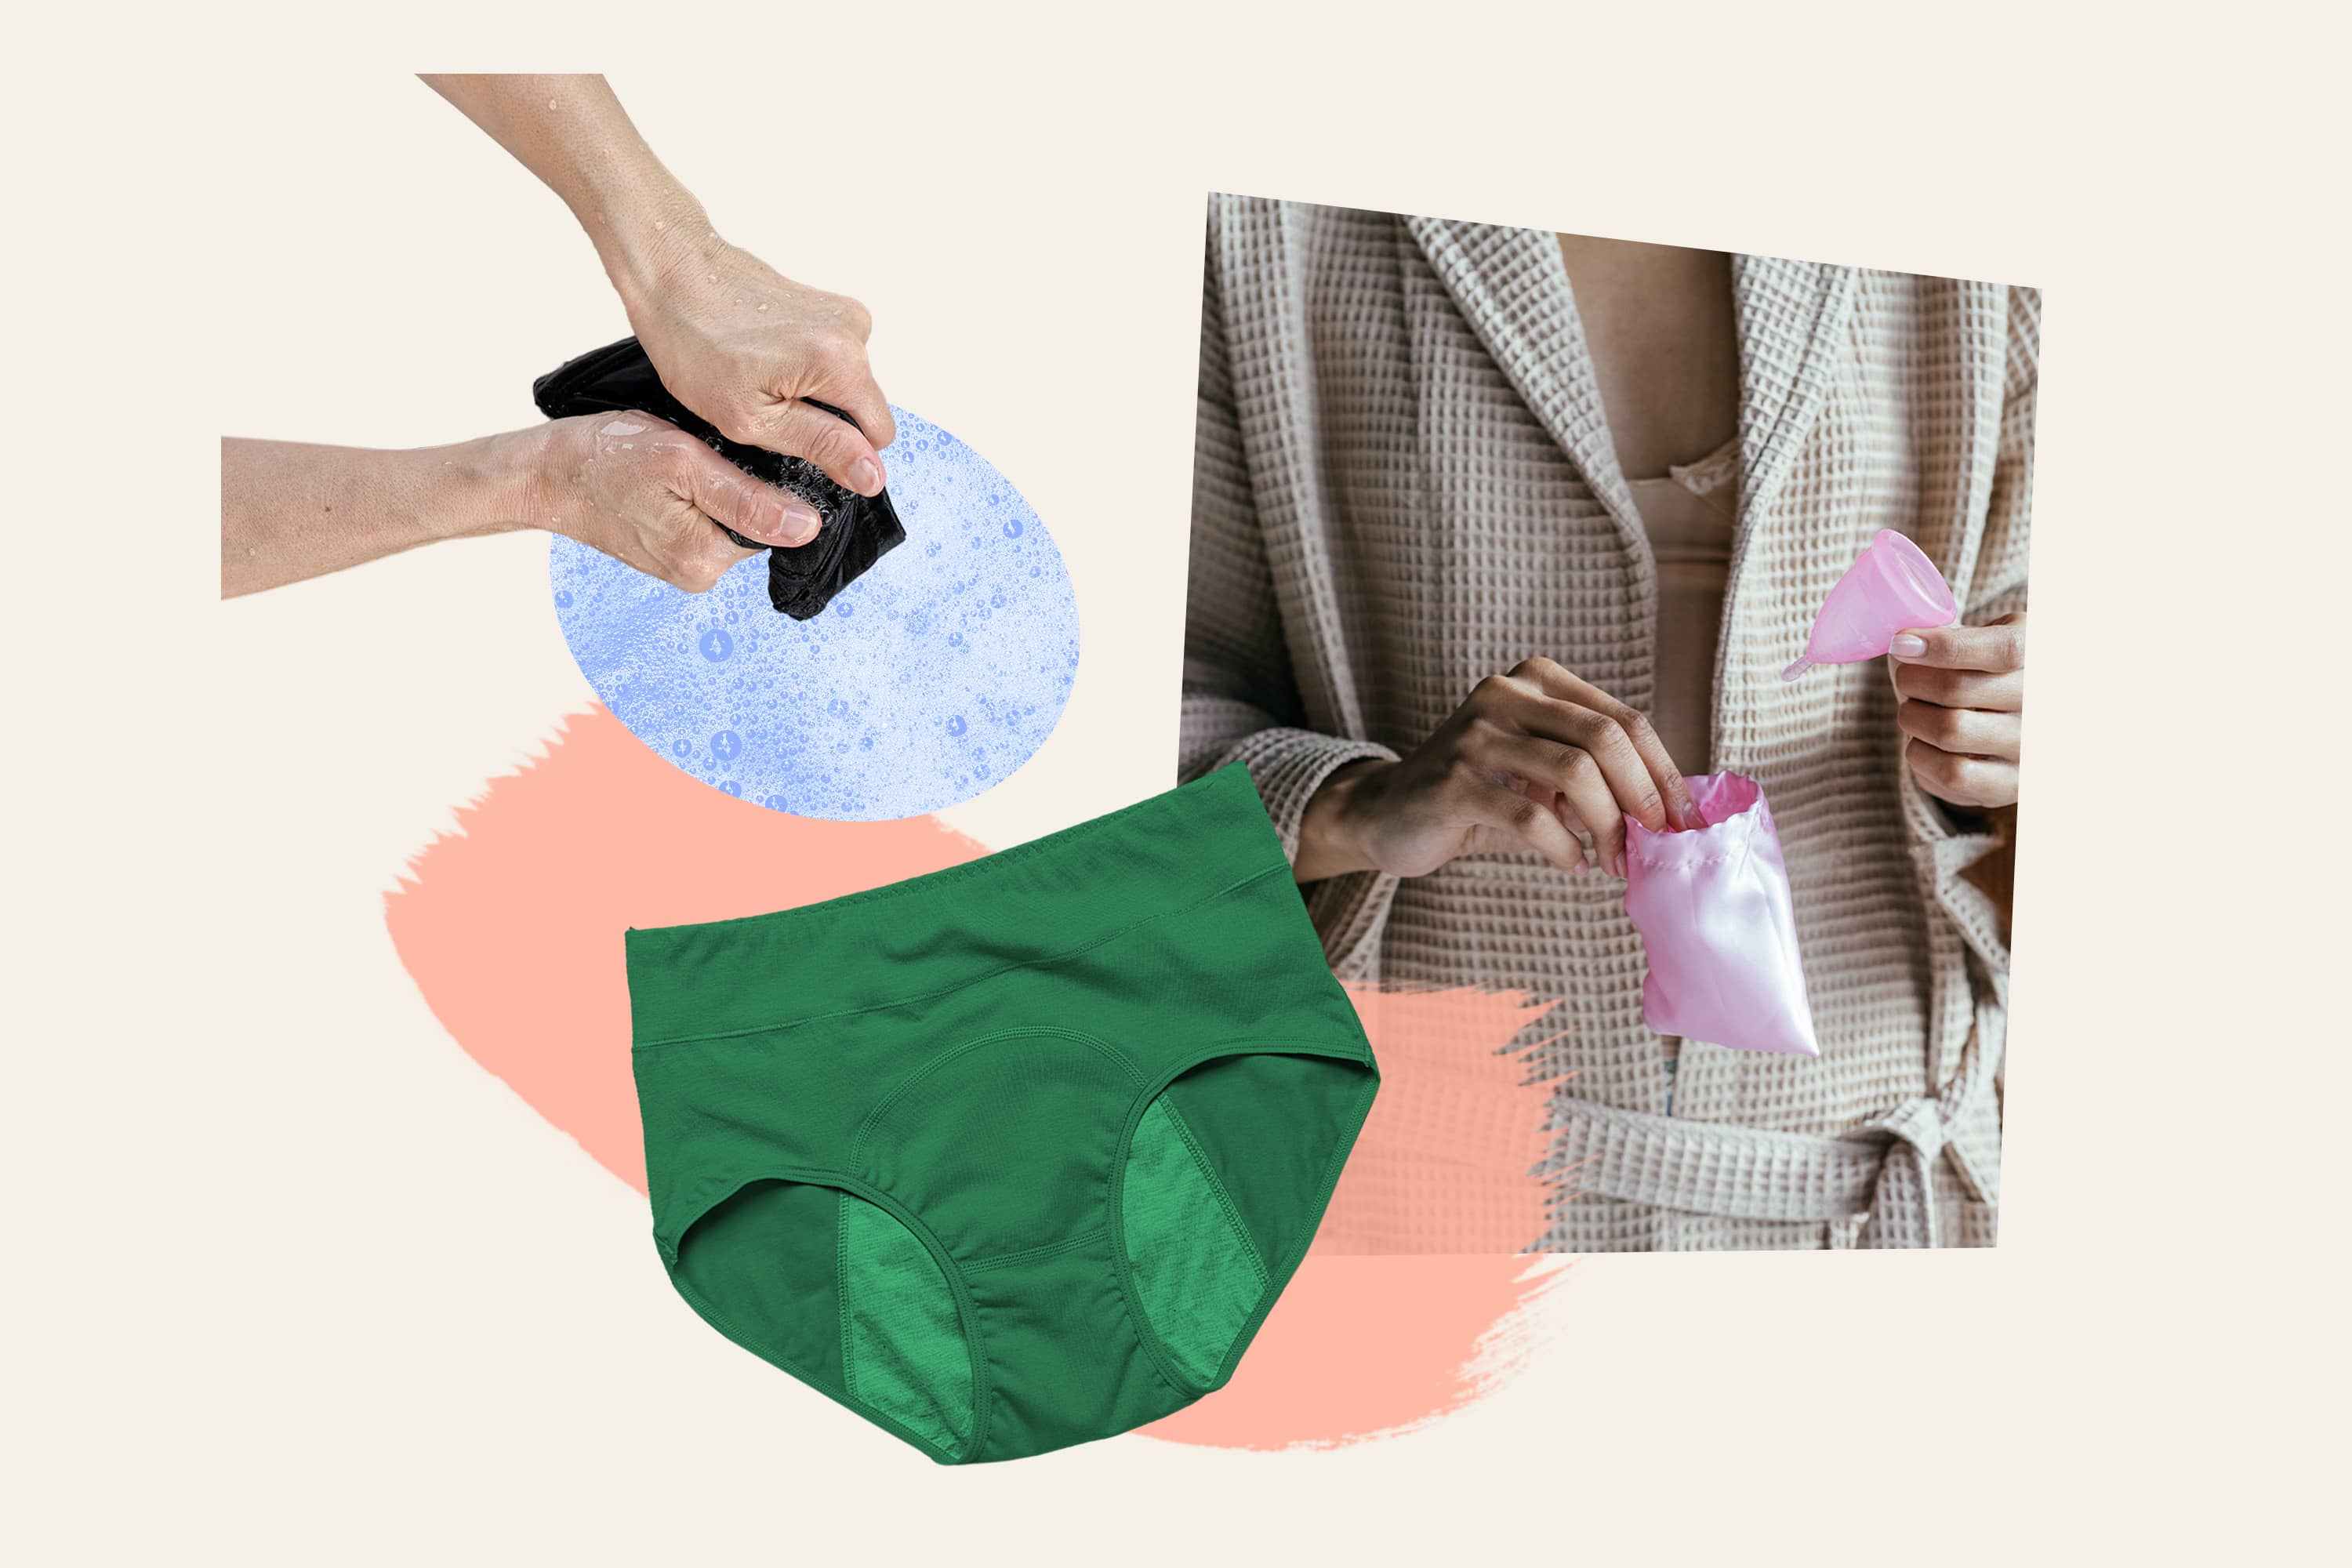 How to Clean Period Underwear and Reusable Products